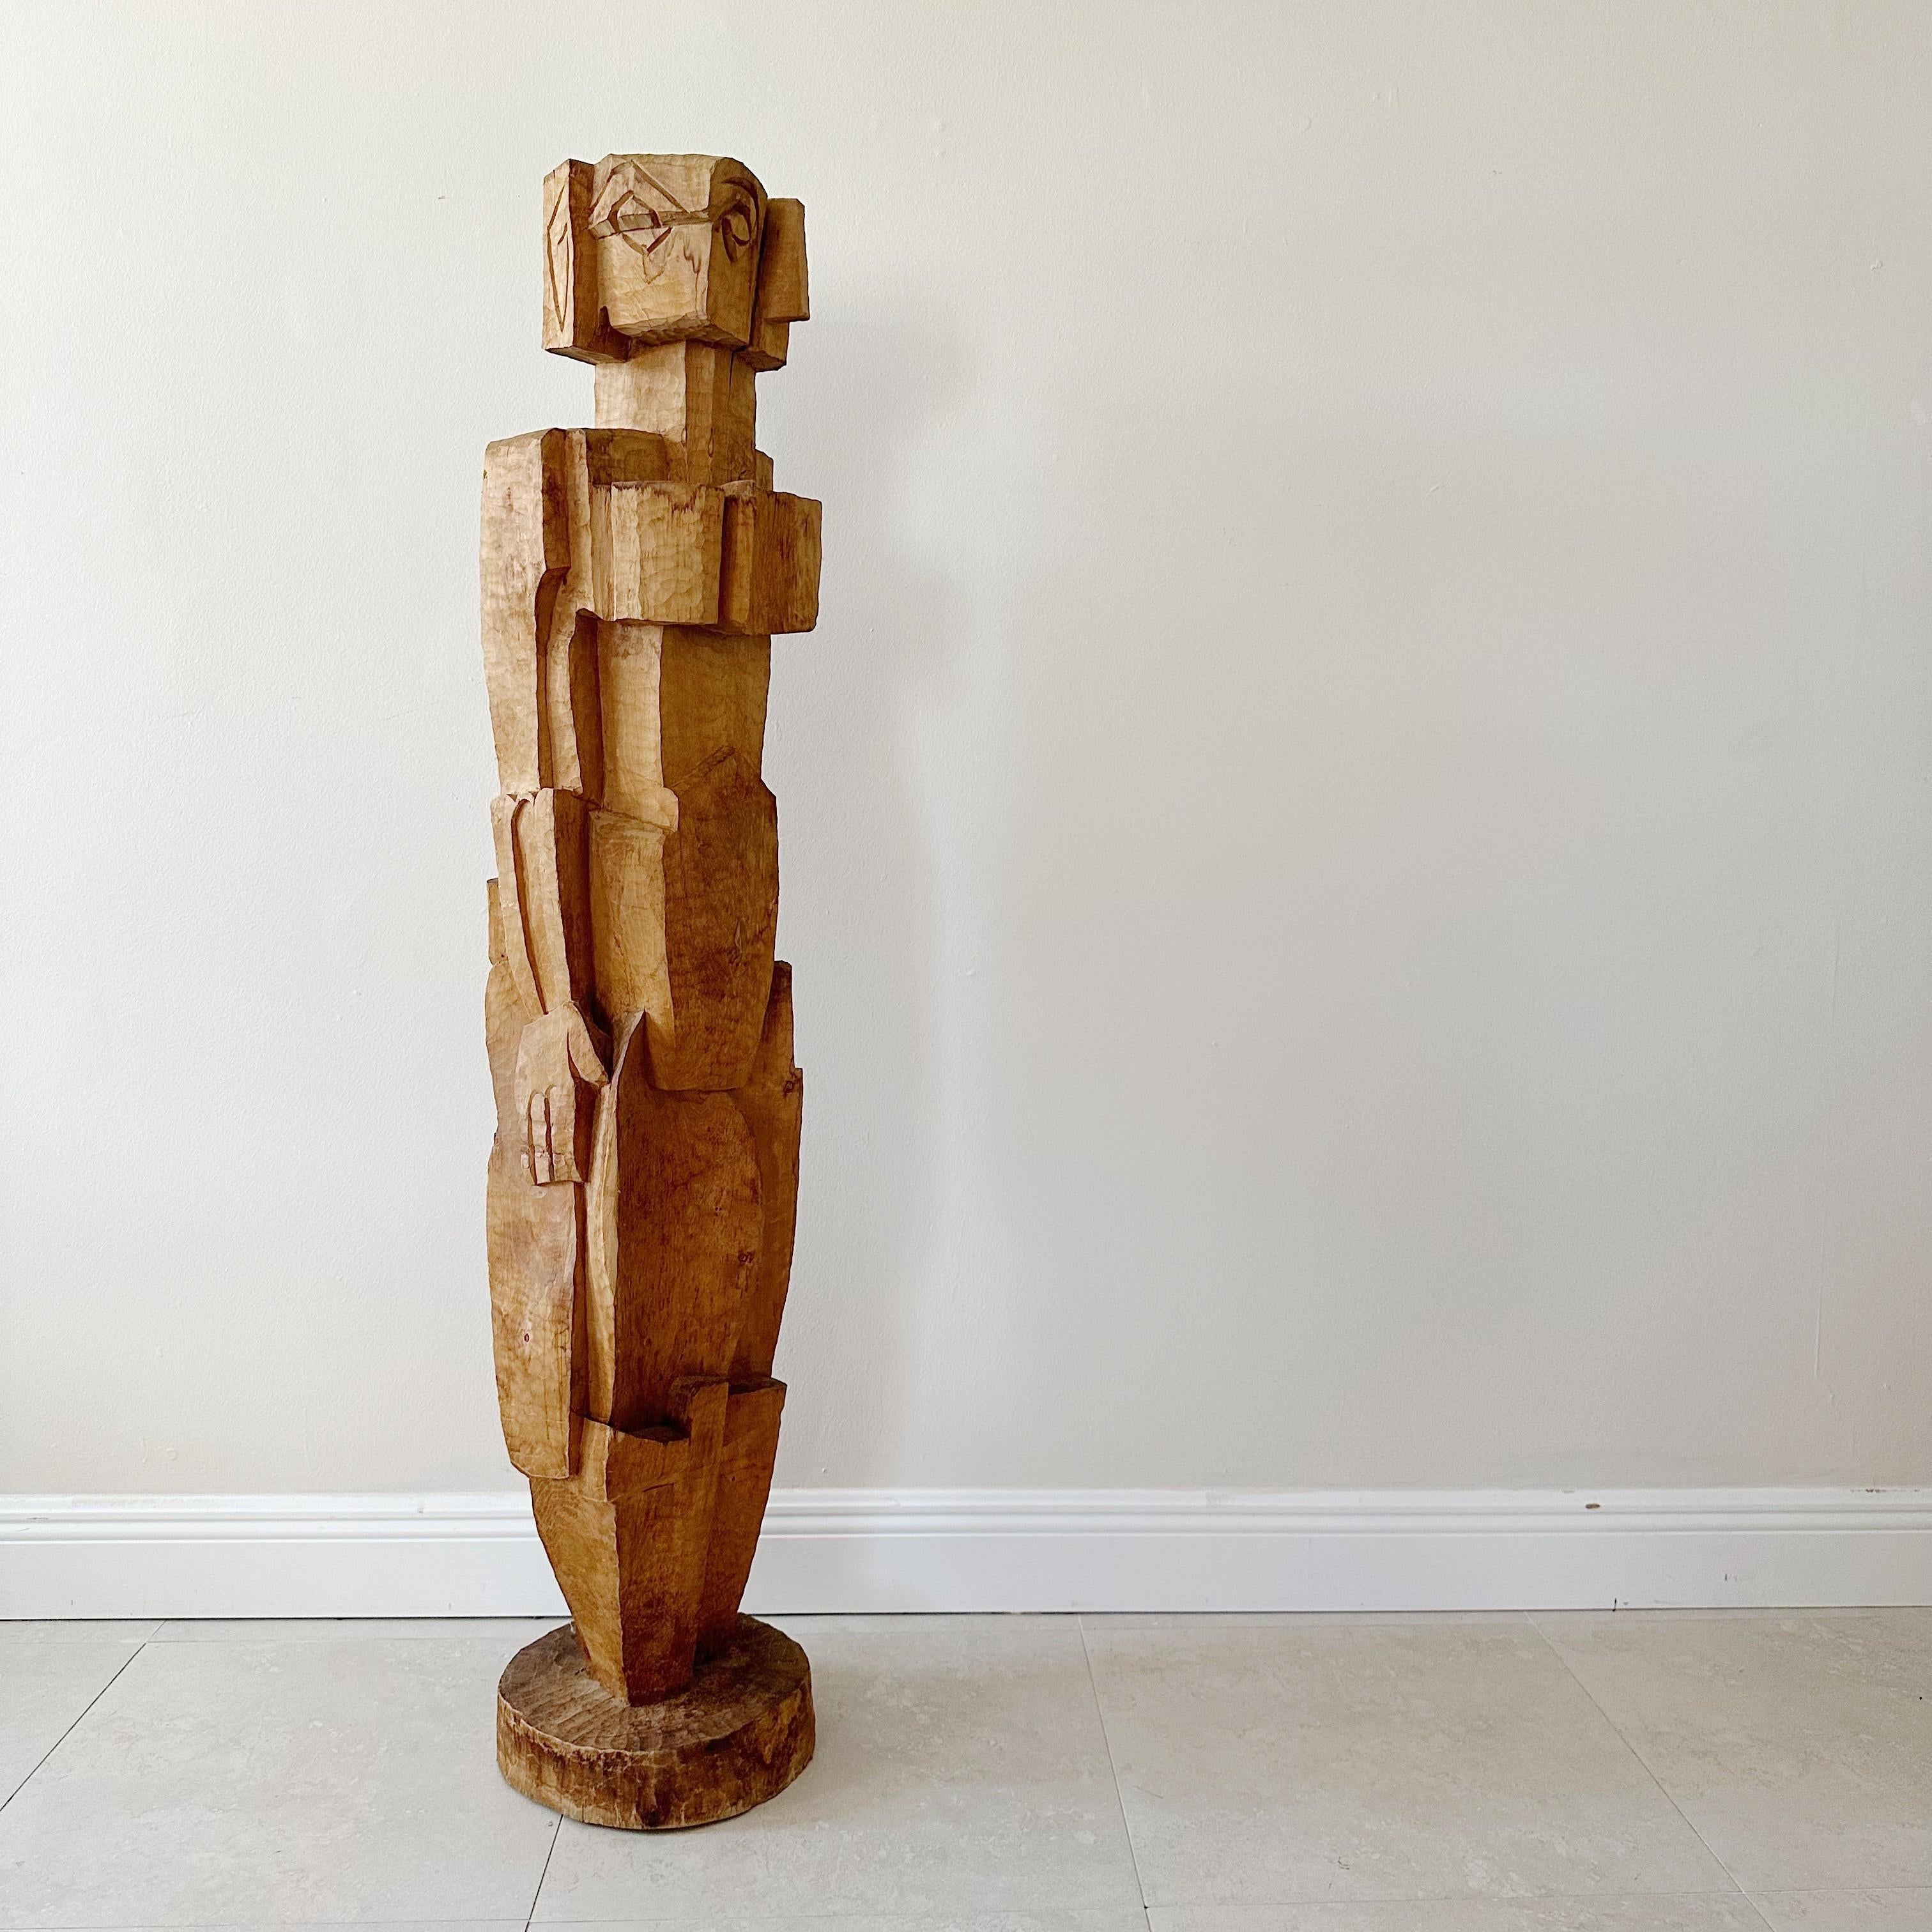 This vintage figural cubist wood sculpture is a striking and unique piece of mid-century artwork. The sculpture features a stylized figure that is carved from high-quality wood and embodies the principles of cubism.

The design of the sculpture is